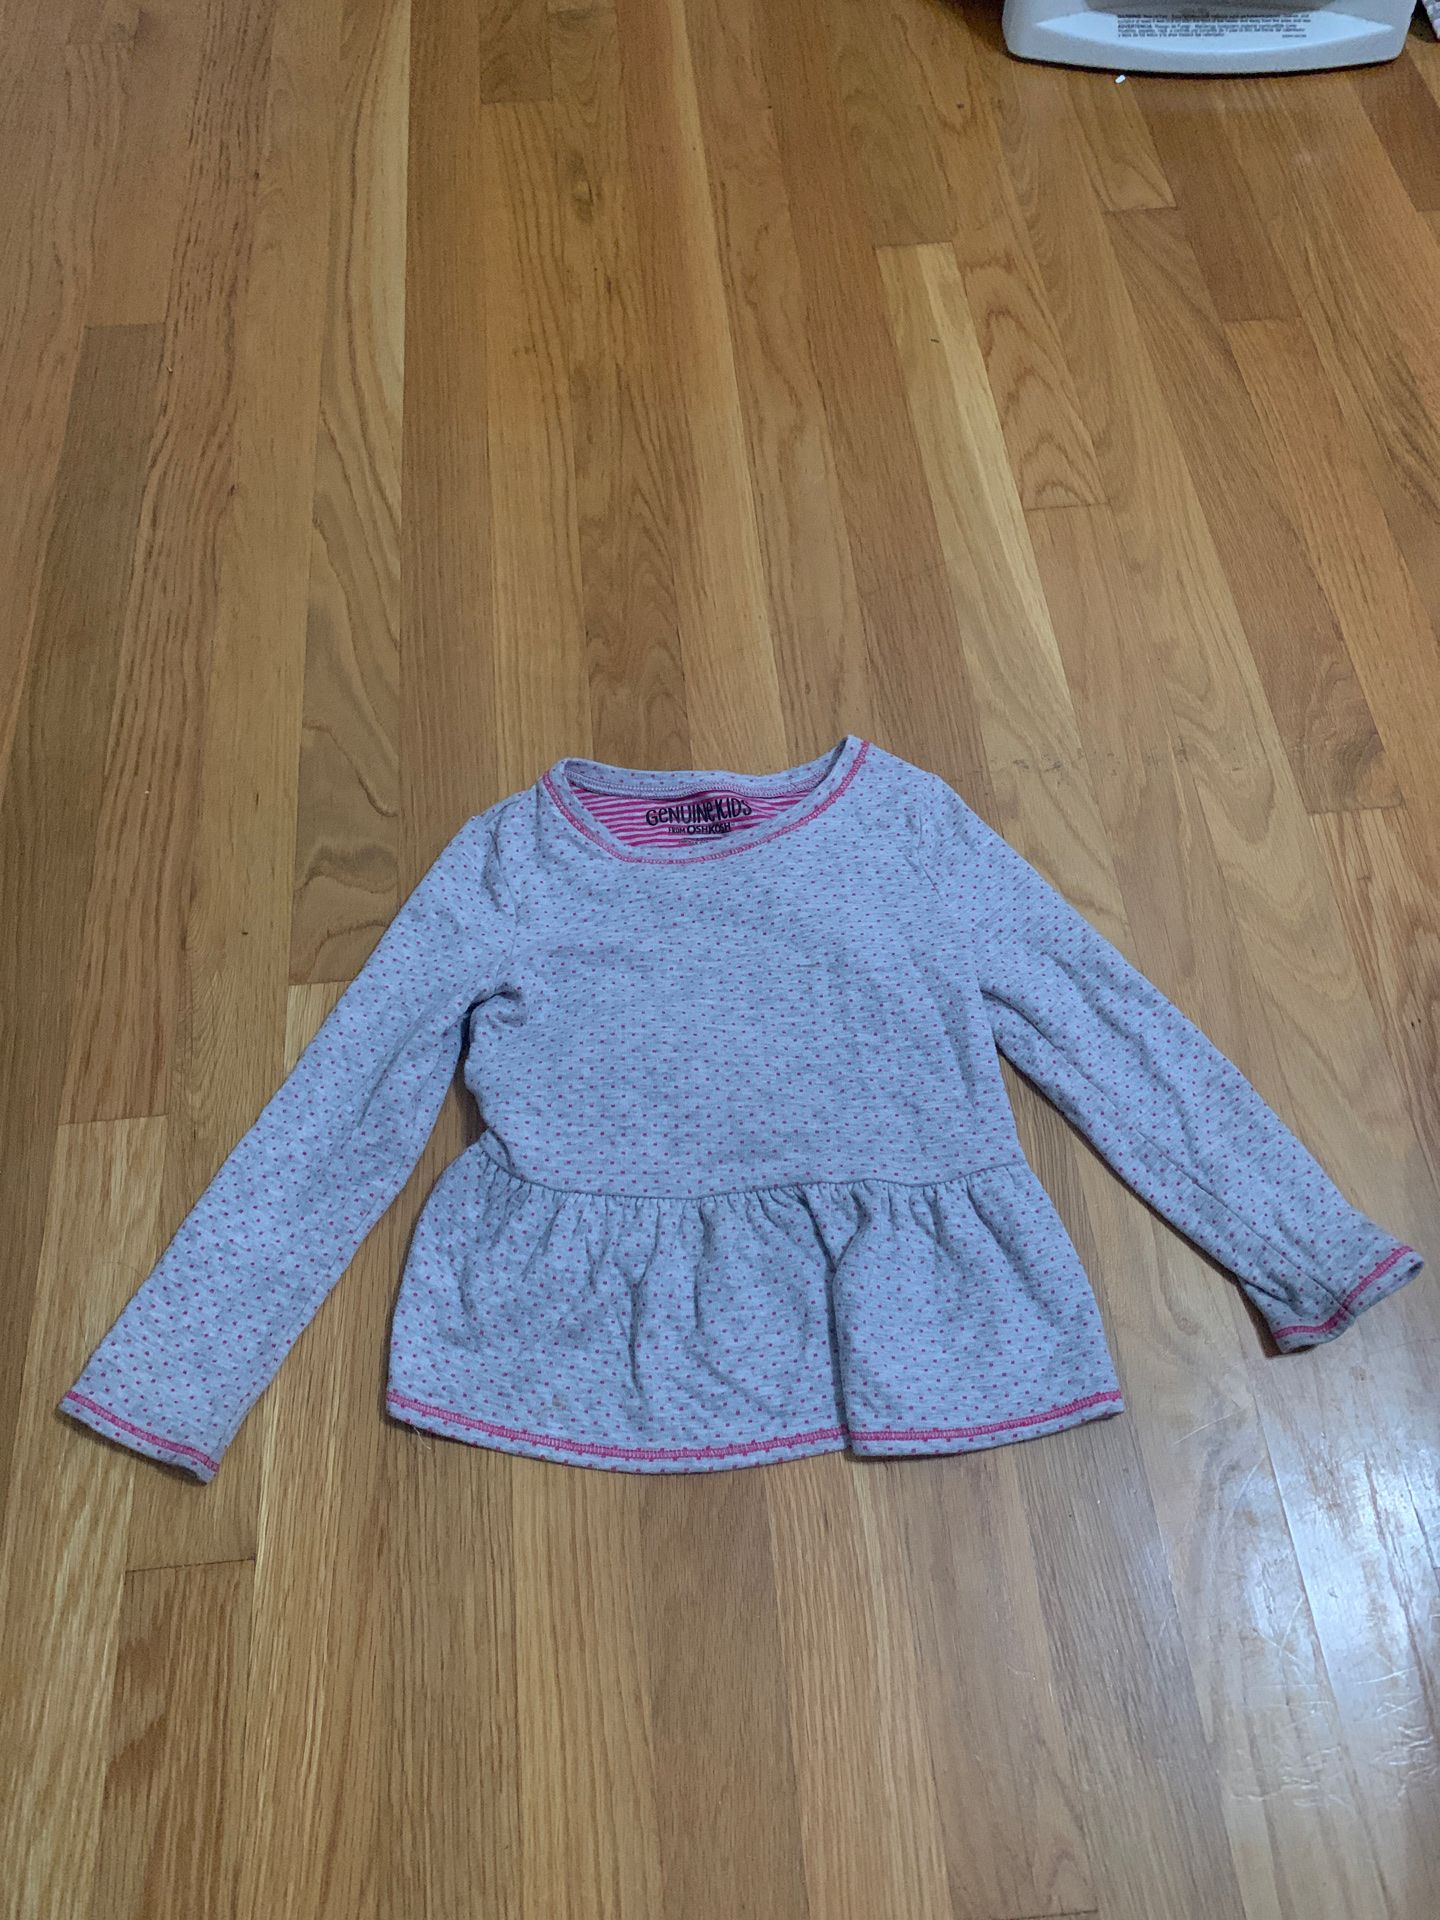 Cute clothes girl size 5 from Oshkosh